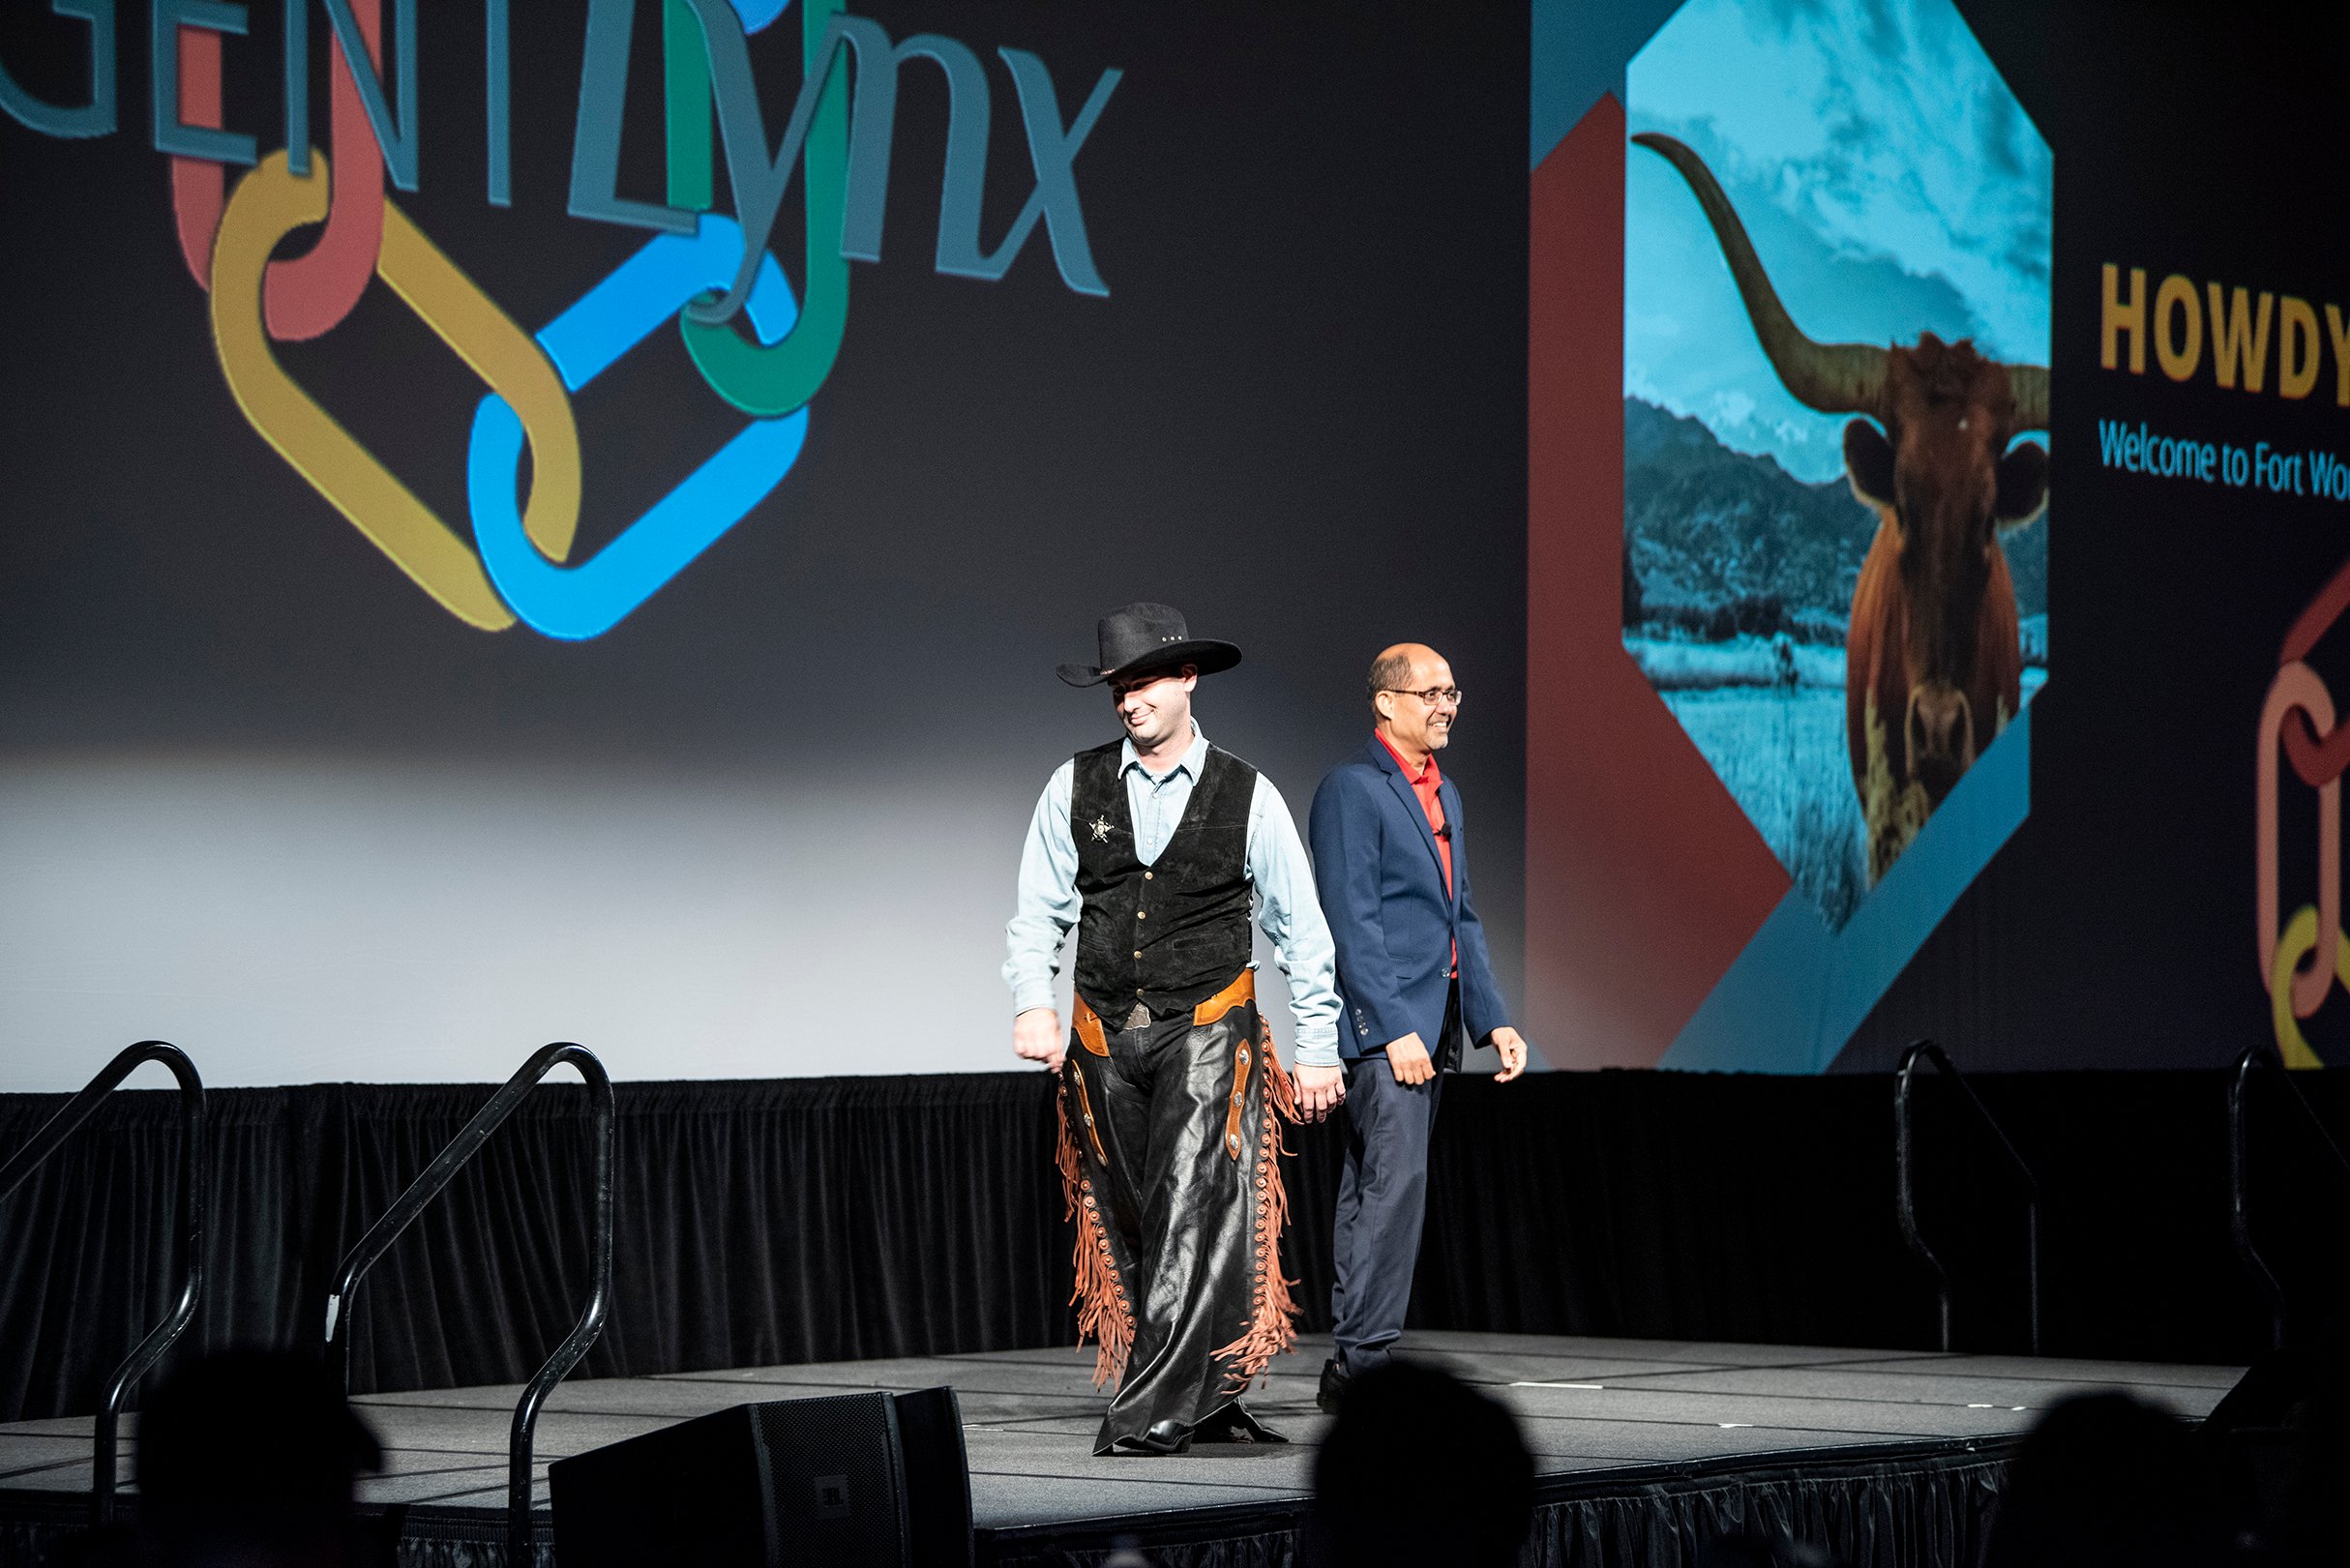 Conference main stage with two speakers, one in a cowboy costume